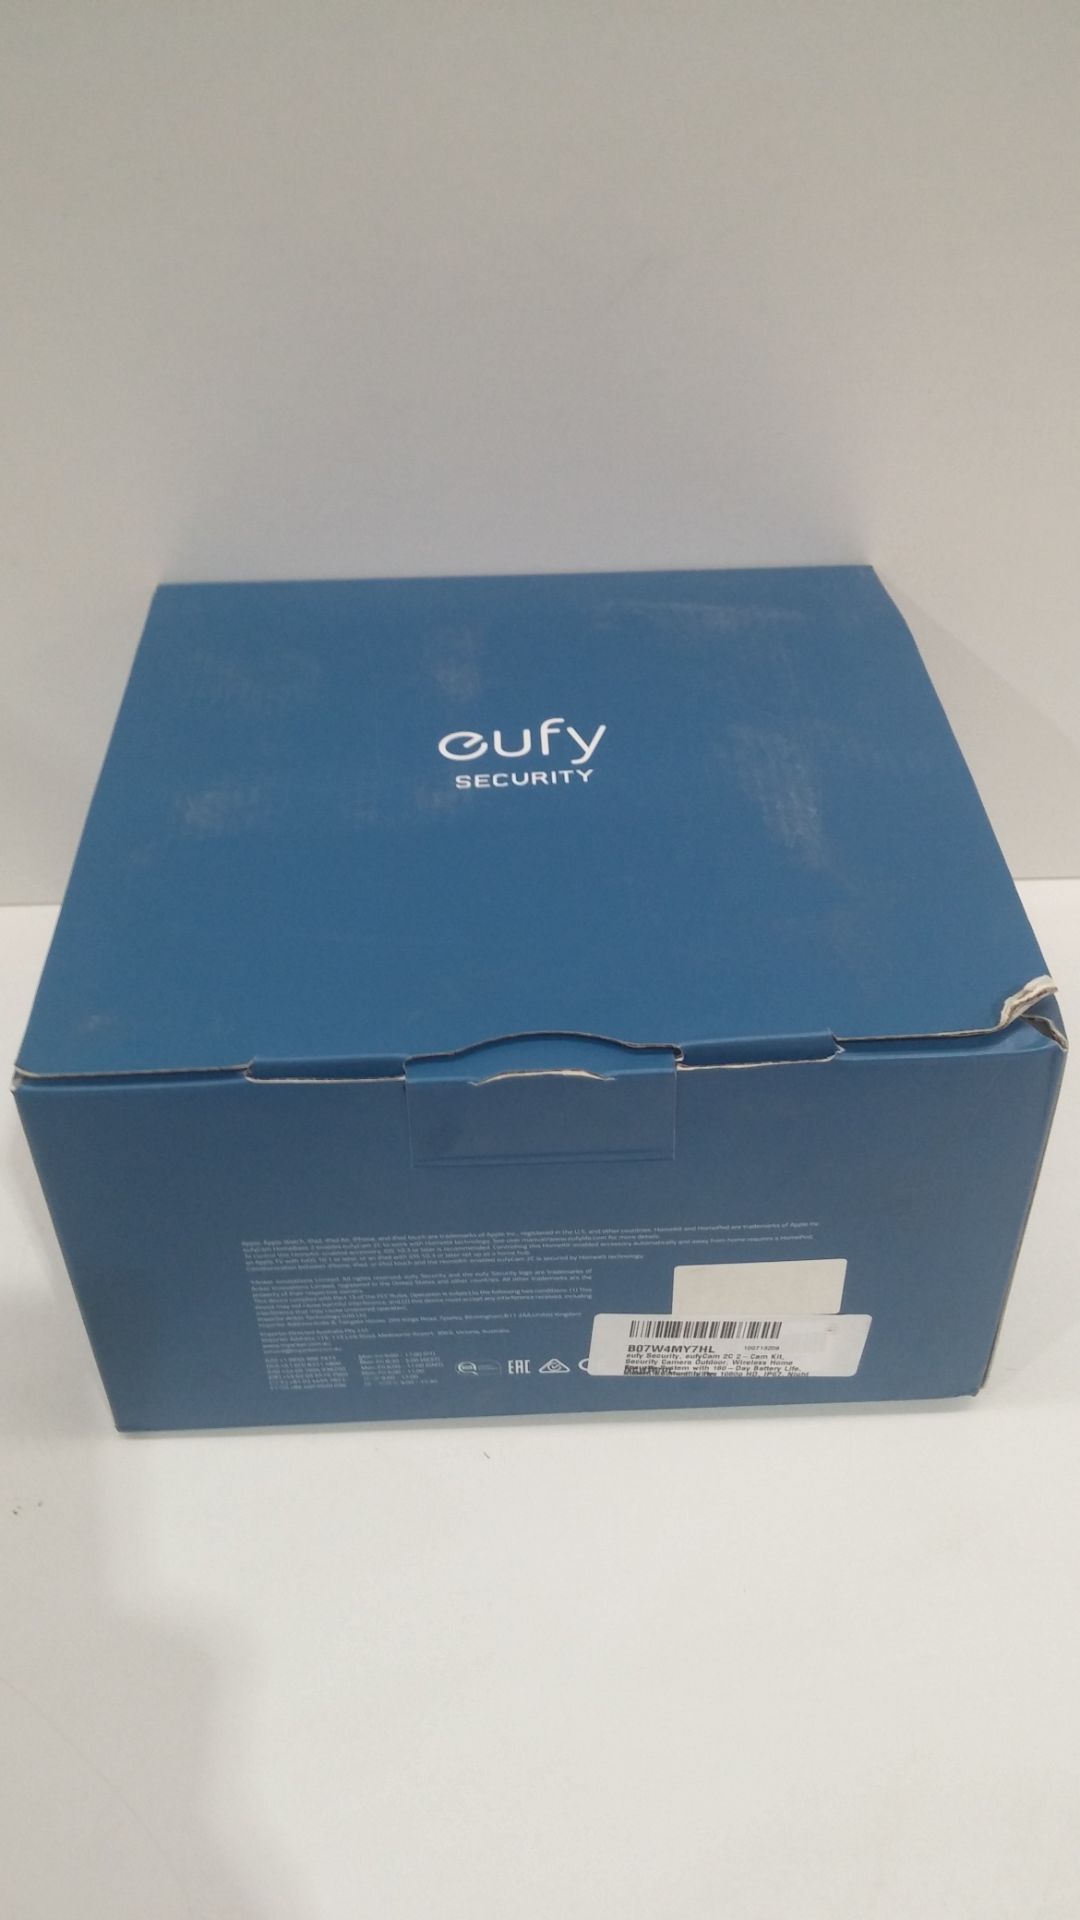 RRP £249.99 Boxed Eufy Security system